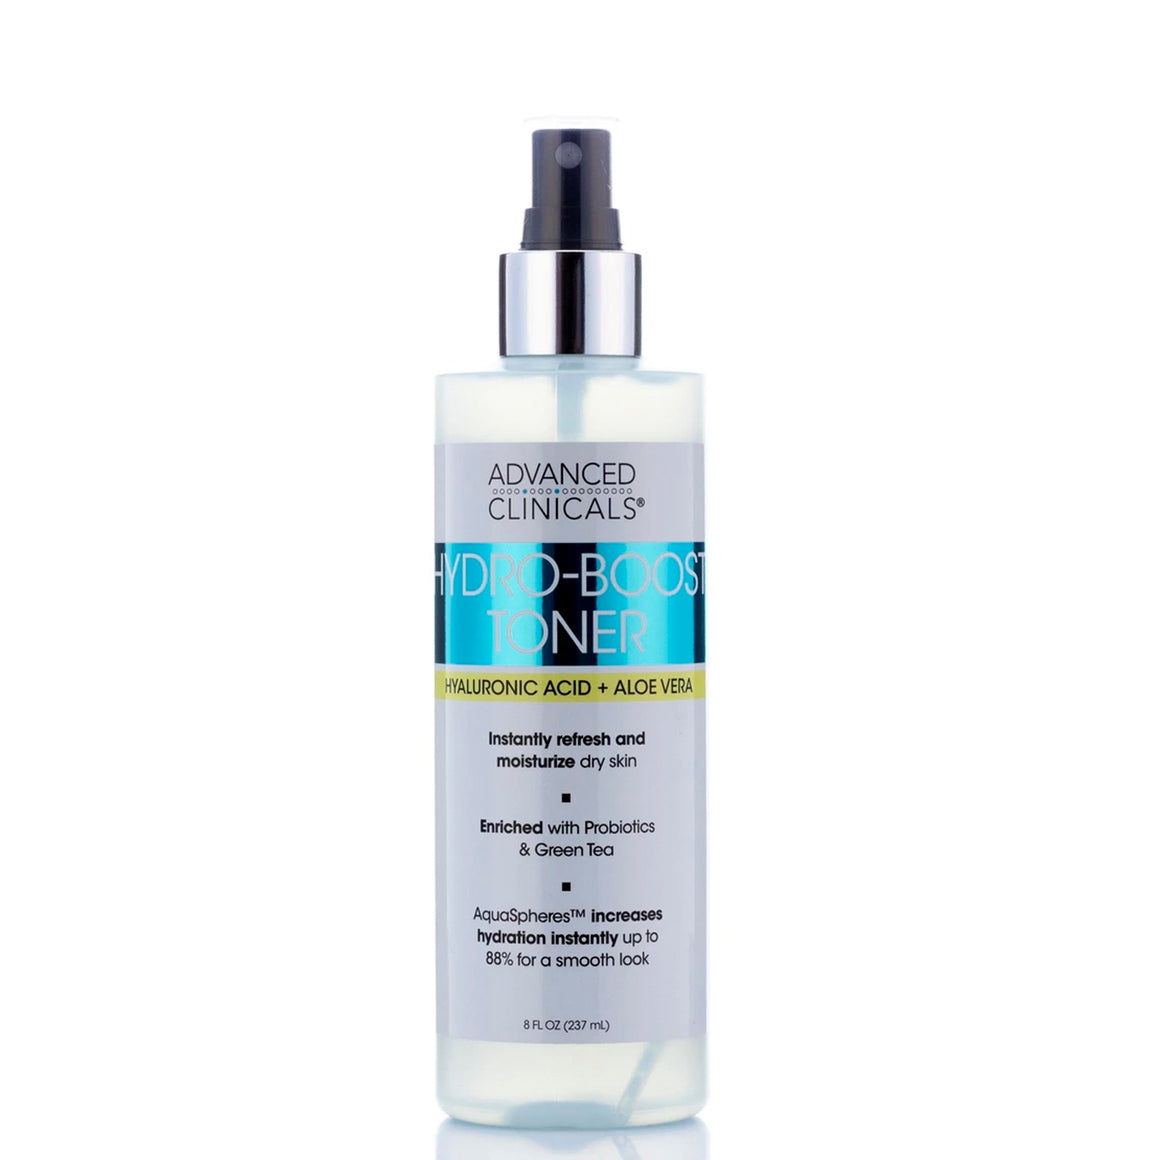 8oz hyaluronic acid and aloe vera hydro boost toner, refreshes and moisturize dry skin, enriched with probiotics and green tea